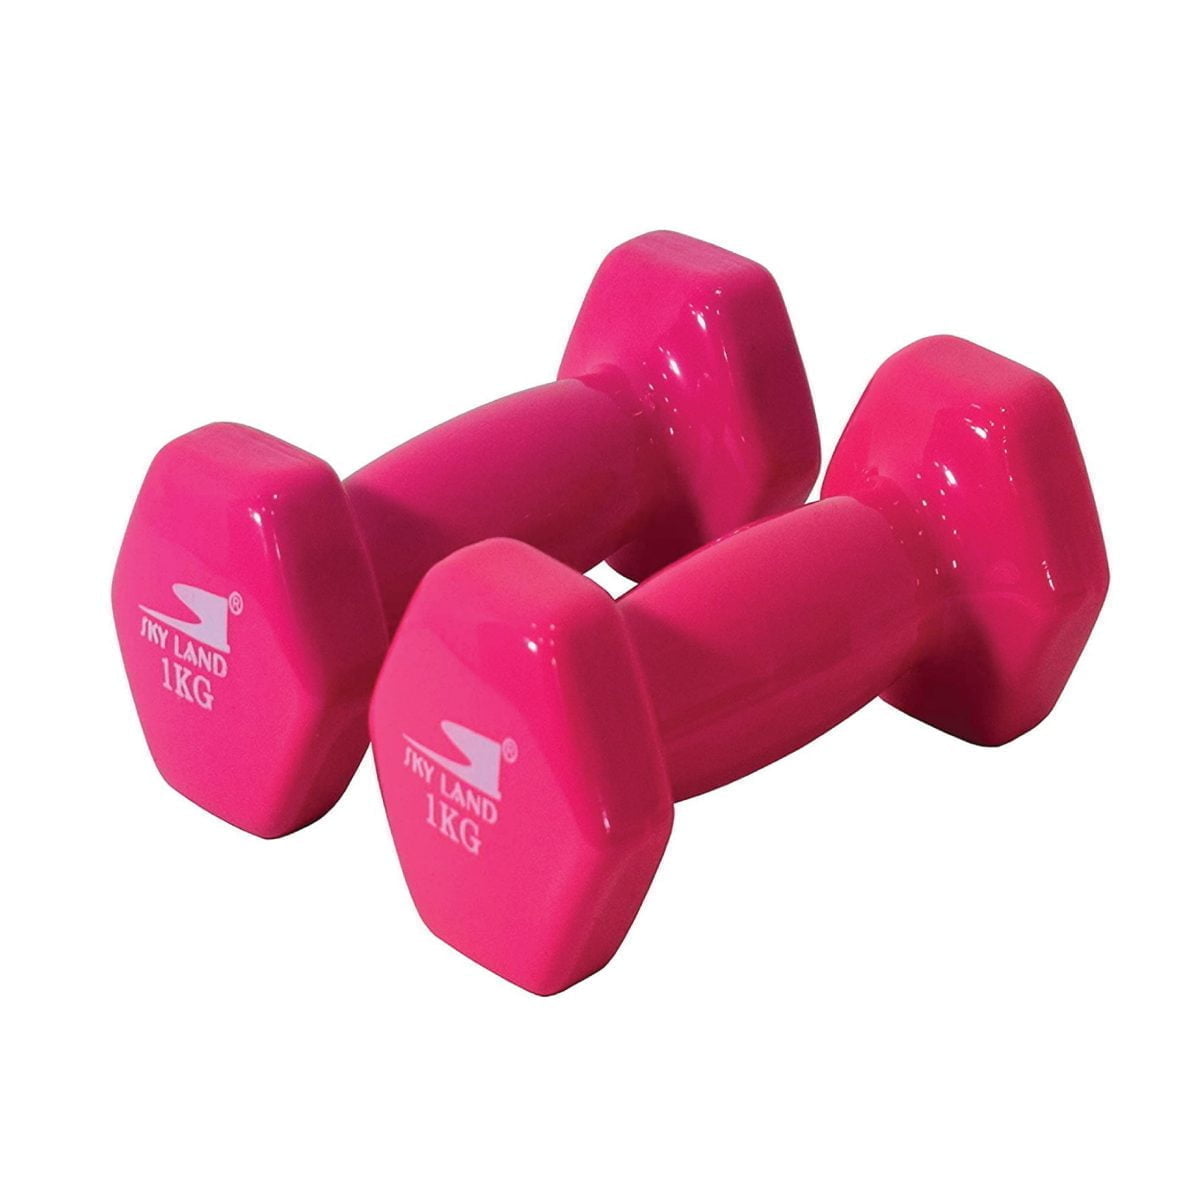 Axc 02 Scaled Labsport &Lt;H1&Gt;Deluxe Vinyl Dumbbell 2-Piece 1Kg&Lt;/H1&Gt; Deluxe Vinyl Dumbbell Constructed Of Heavy-Duty Solid Cast Iron Core To Add More Durability And Stability. Will Not Break Or Bend After Repeated Use. These Durable Hand Weights Are The Perfect Addition To Aerobics And Step Workouts, As Well As Any Standard Strength Training With Weights For Added Intensity And Resistance. Skyland Deluxe Vinyl Dumbbells -Em-9219R-3 Provides A Comfortable Feel To Handle And A Snug Grip For Sweaty Hands. Our Dumbbells Is A Great Assistant In A Wide Range Of Training And Fitness Exercises. Tone All Over Muscles, Lose More Weight And Enhance Your Body Strength By Using It To Perform Curls, Triceps Extension And Bench Press Or Shoulder Press Or Simply Use It When You Walk Or Do Aerobics Exercises To Add More Weight And Thus Improve Your Core Strength. Deluxe Vinyl Dumbbell 2-Piece 1Kg